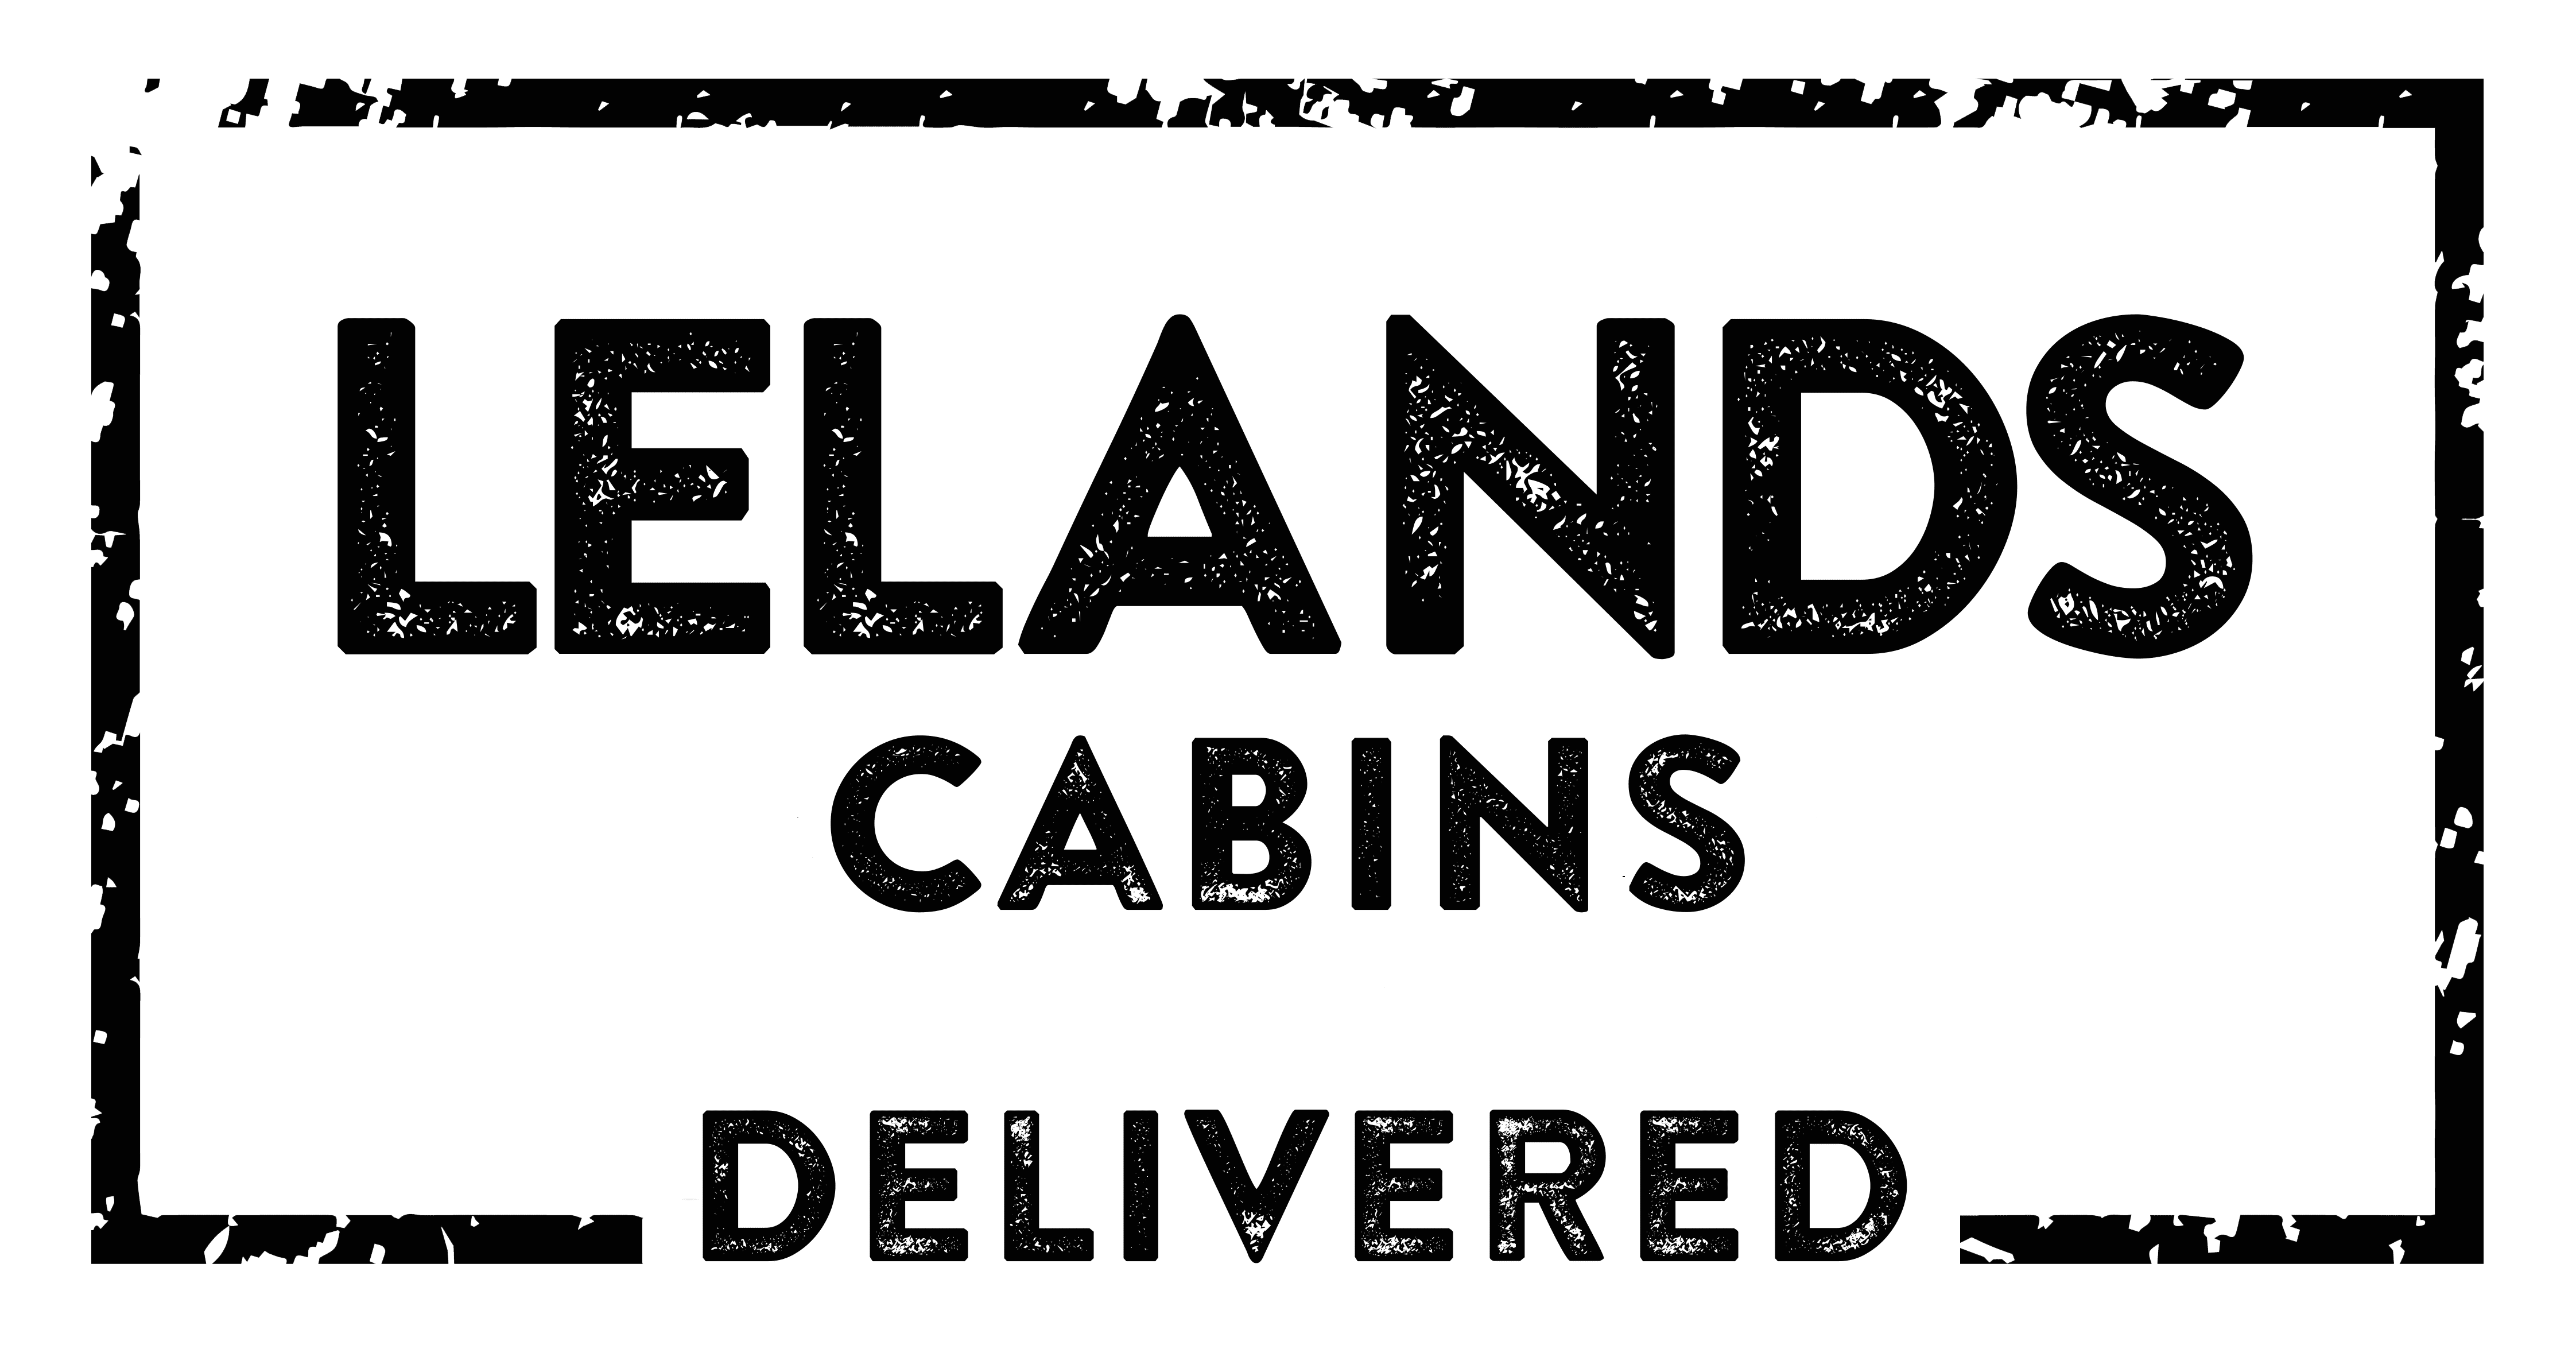 Cabins Blk Rebrand Logo transparent with Blk - Leland’s Custom PreFab Cabins and Tiny Homes of Texas